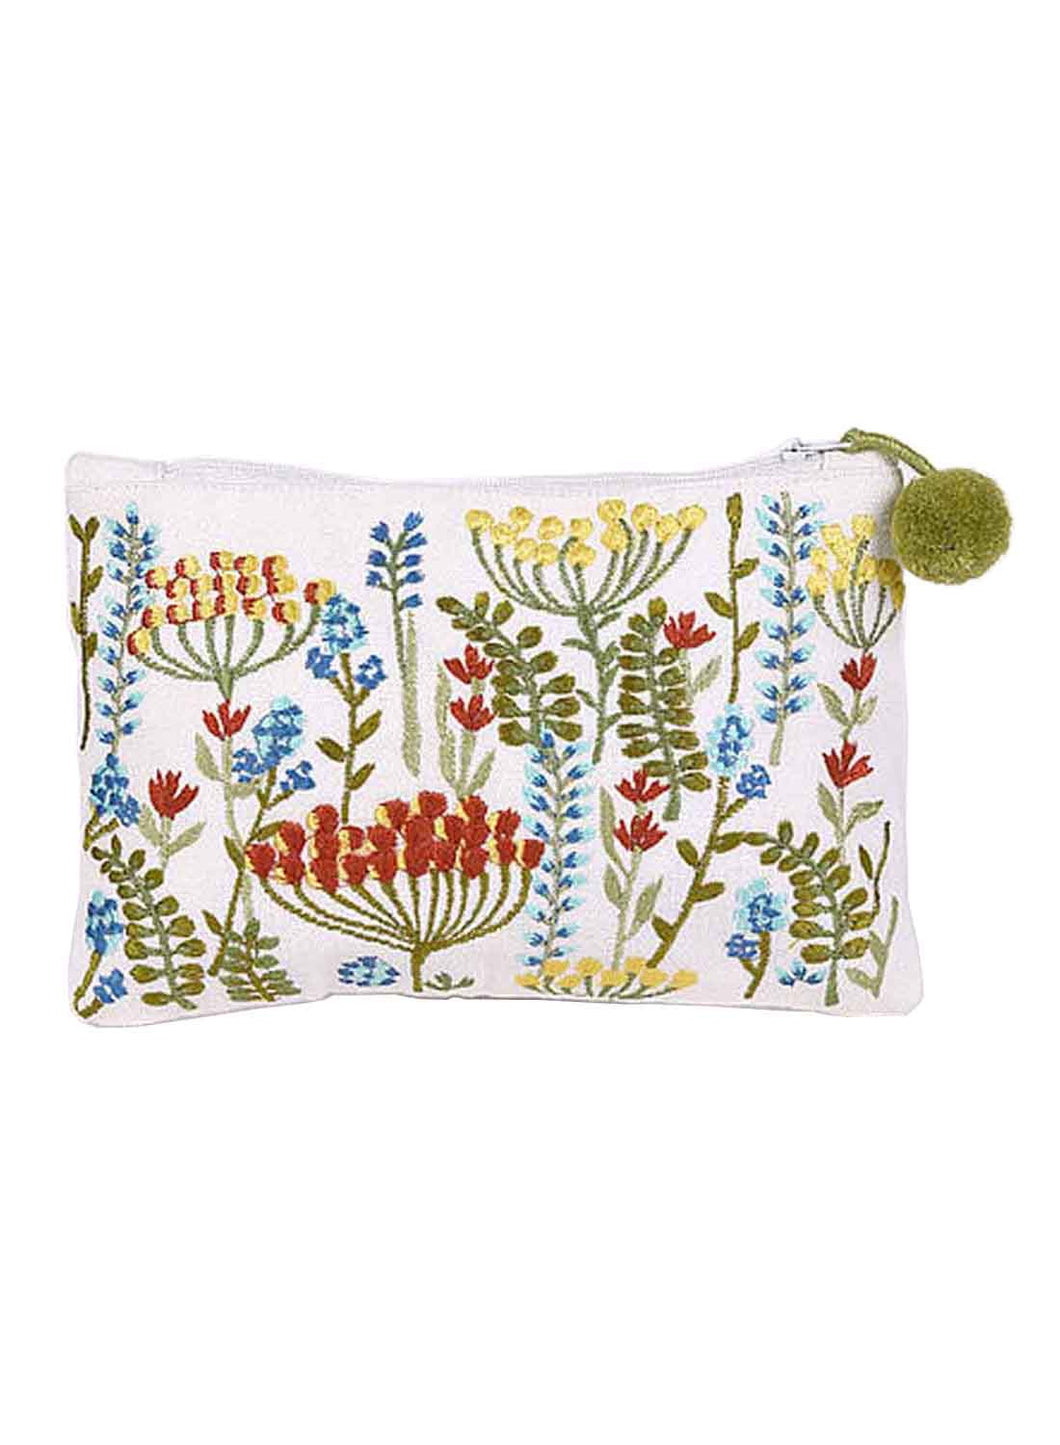 Kanyoga Spring Moon Embroidery Cotton Pouch With Pom Pom Attached For Women